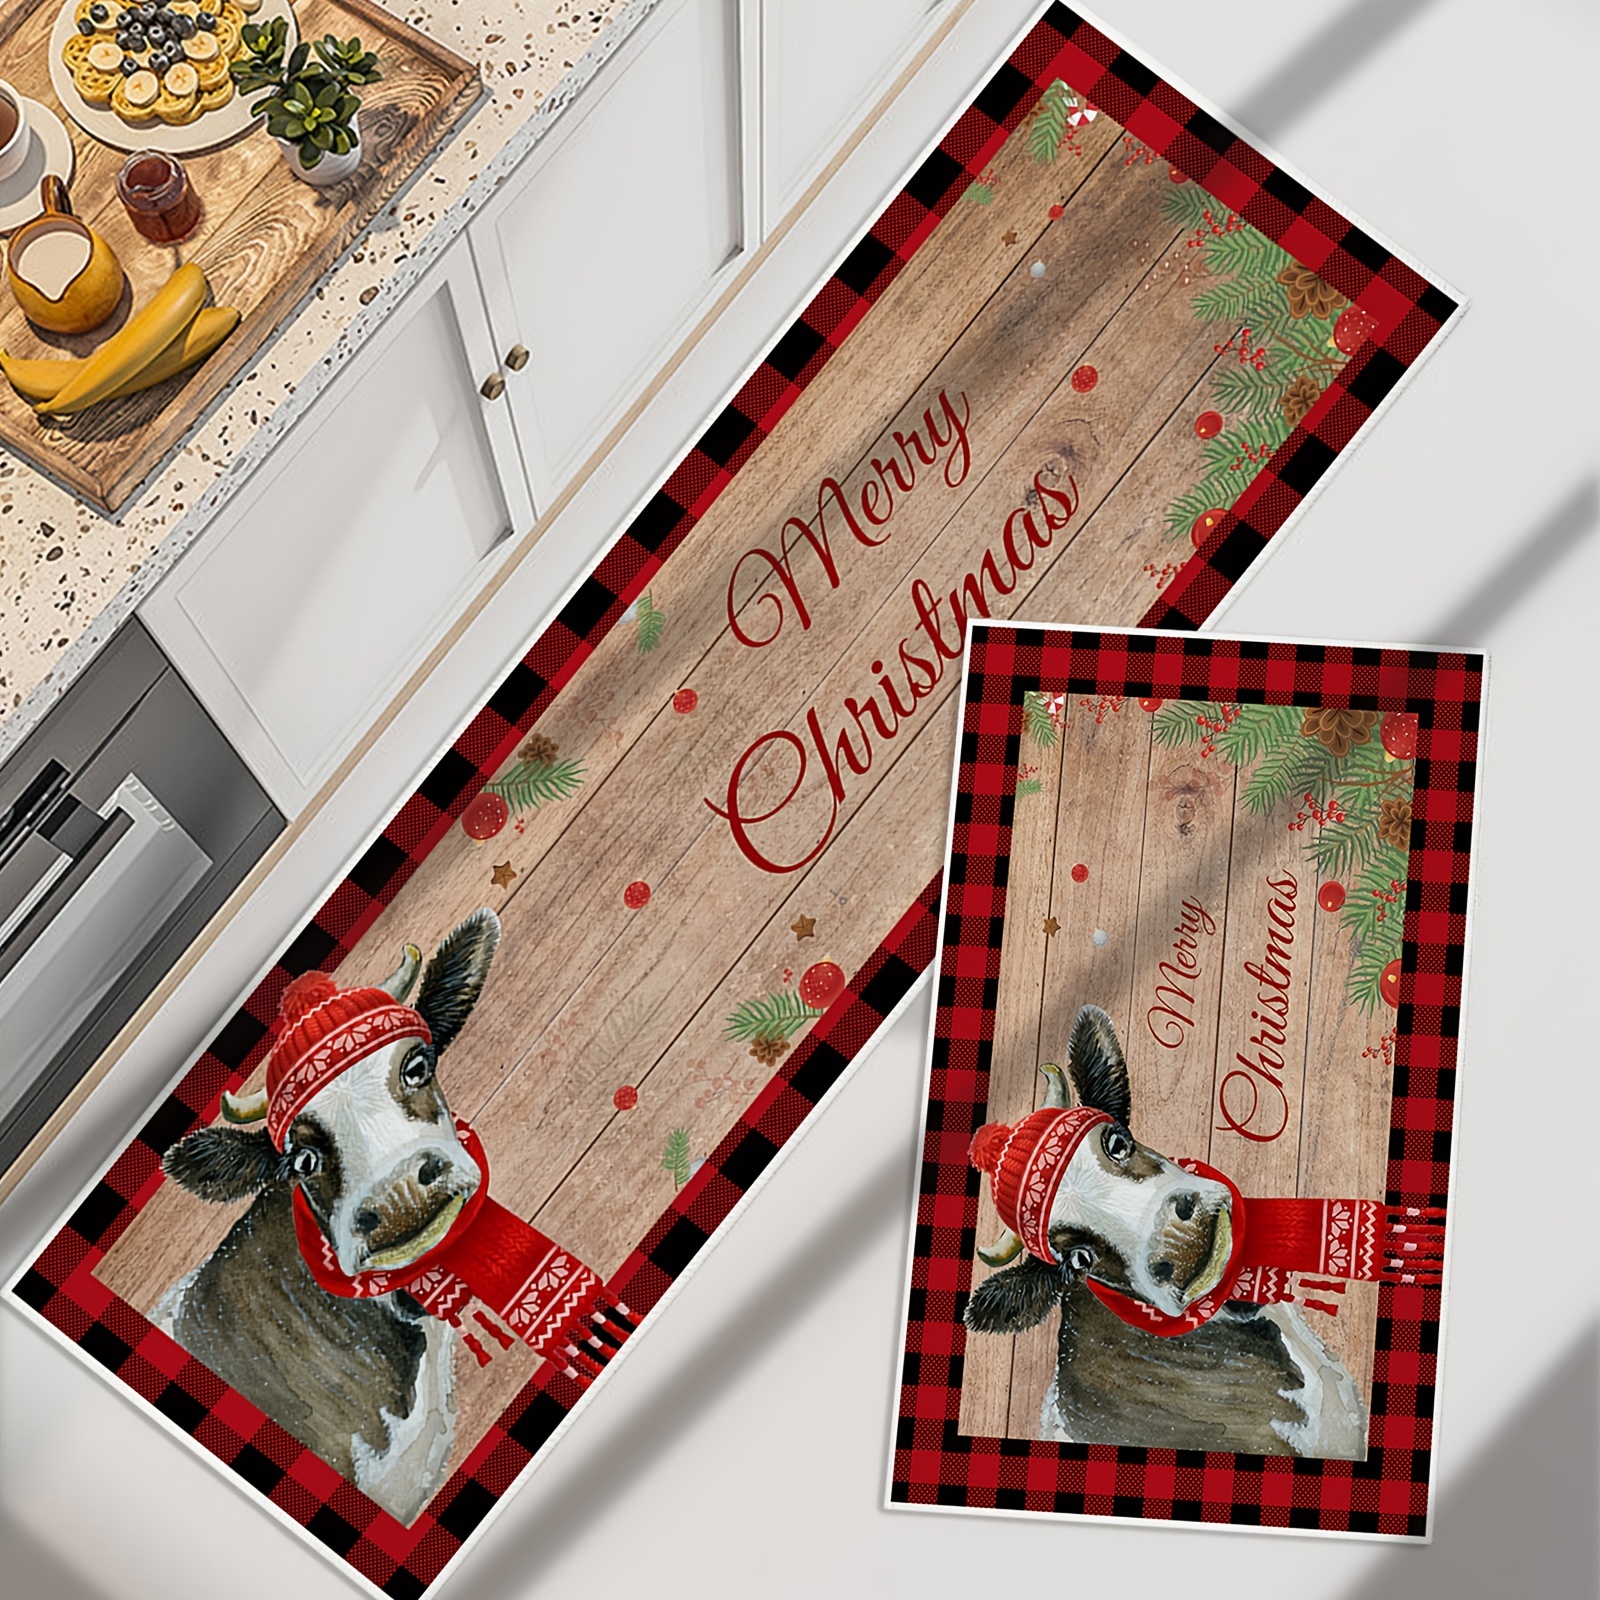 Roszwtit Chef Kitchen Rugs and Mats Set of 2, Christmas Believe